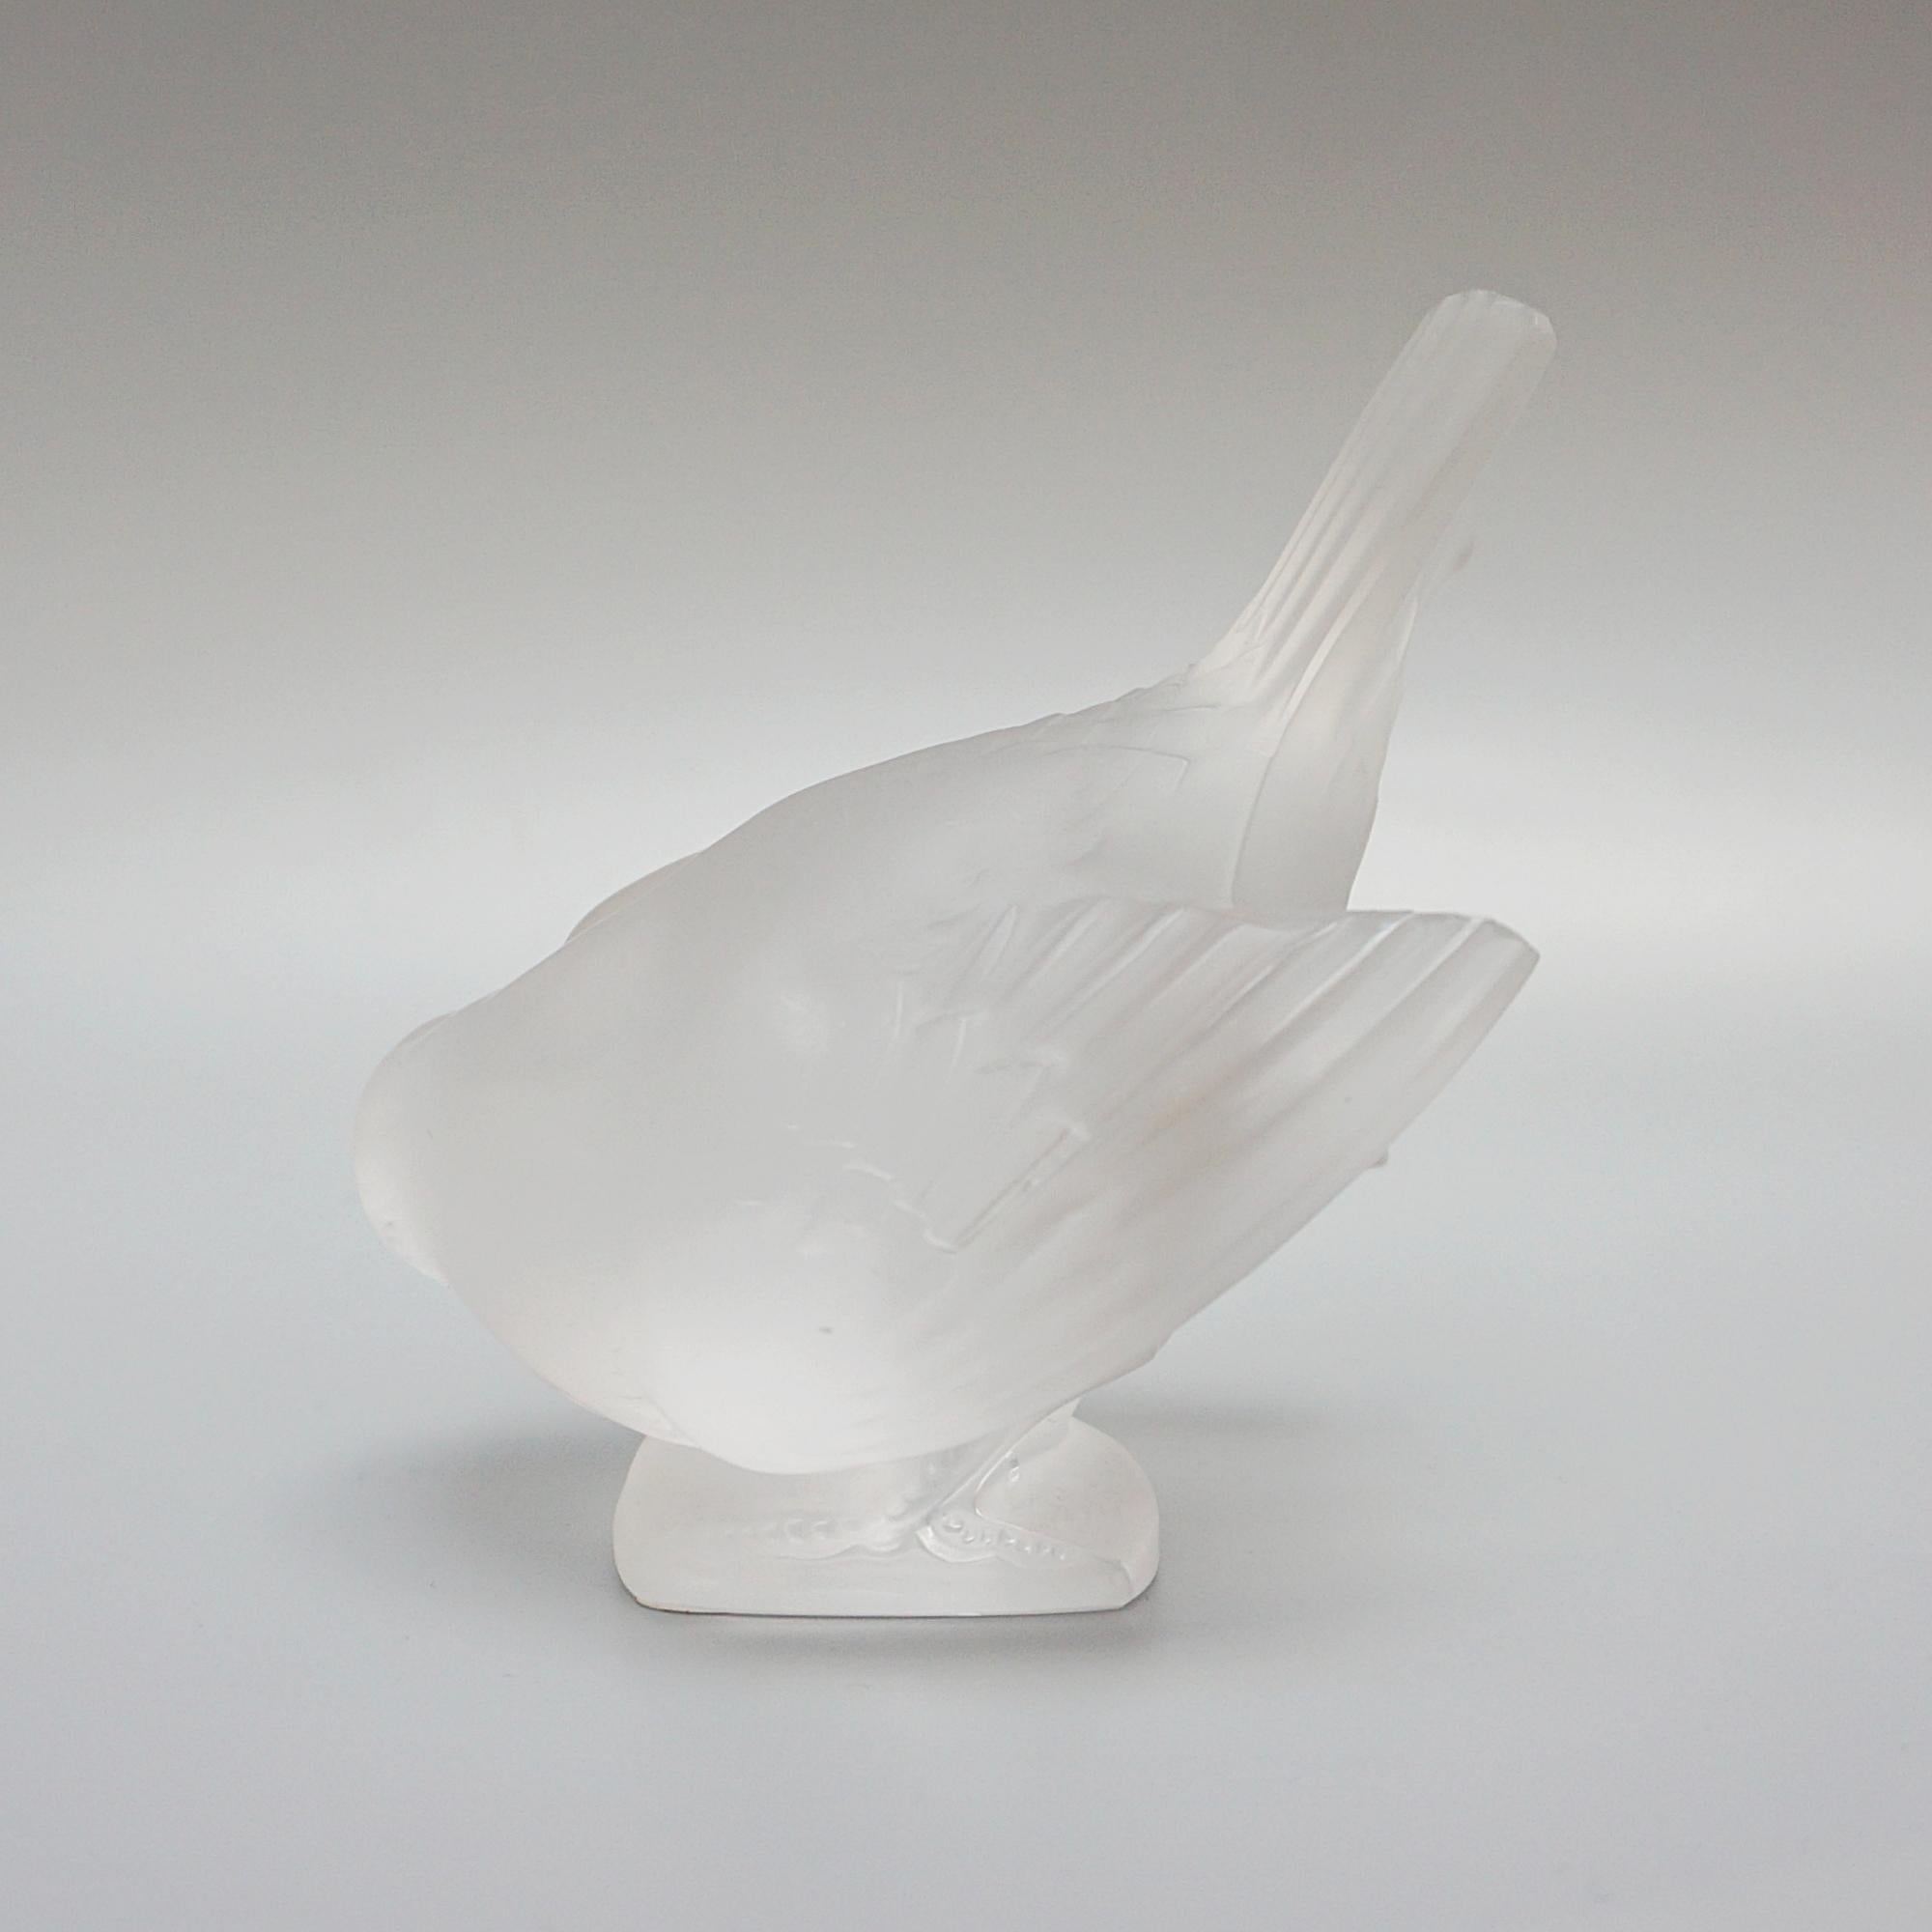 Mid-20th Century 'Moineau Coquet' A Glass Bird Paperweight by Marc Lalique (1900 - 1977)